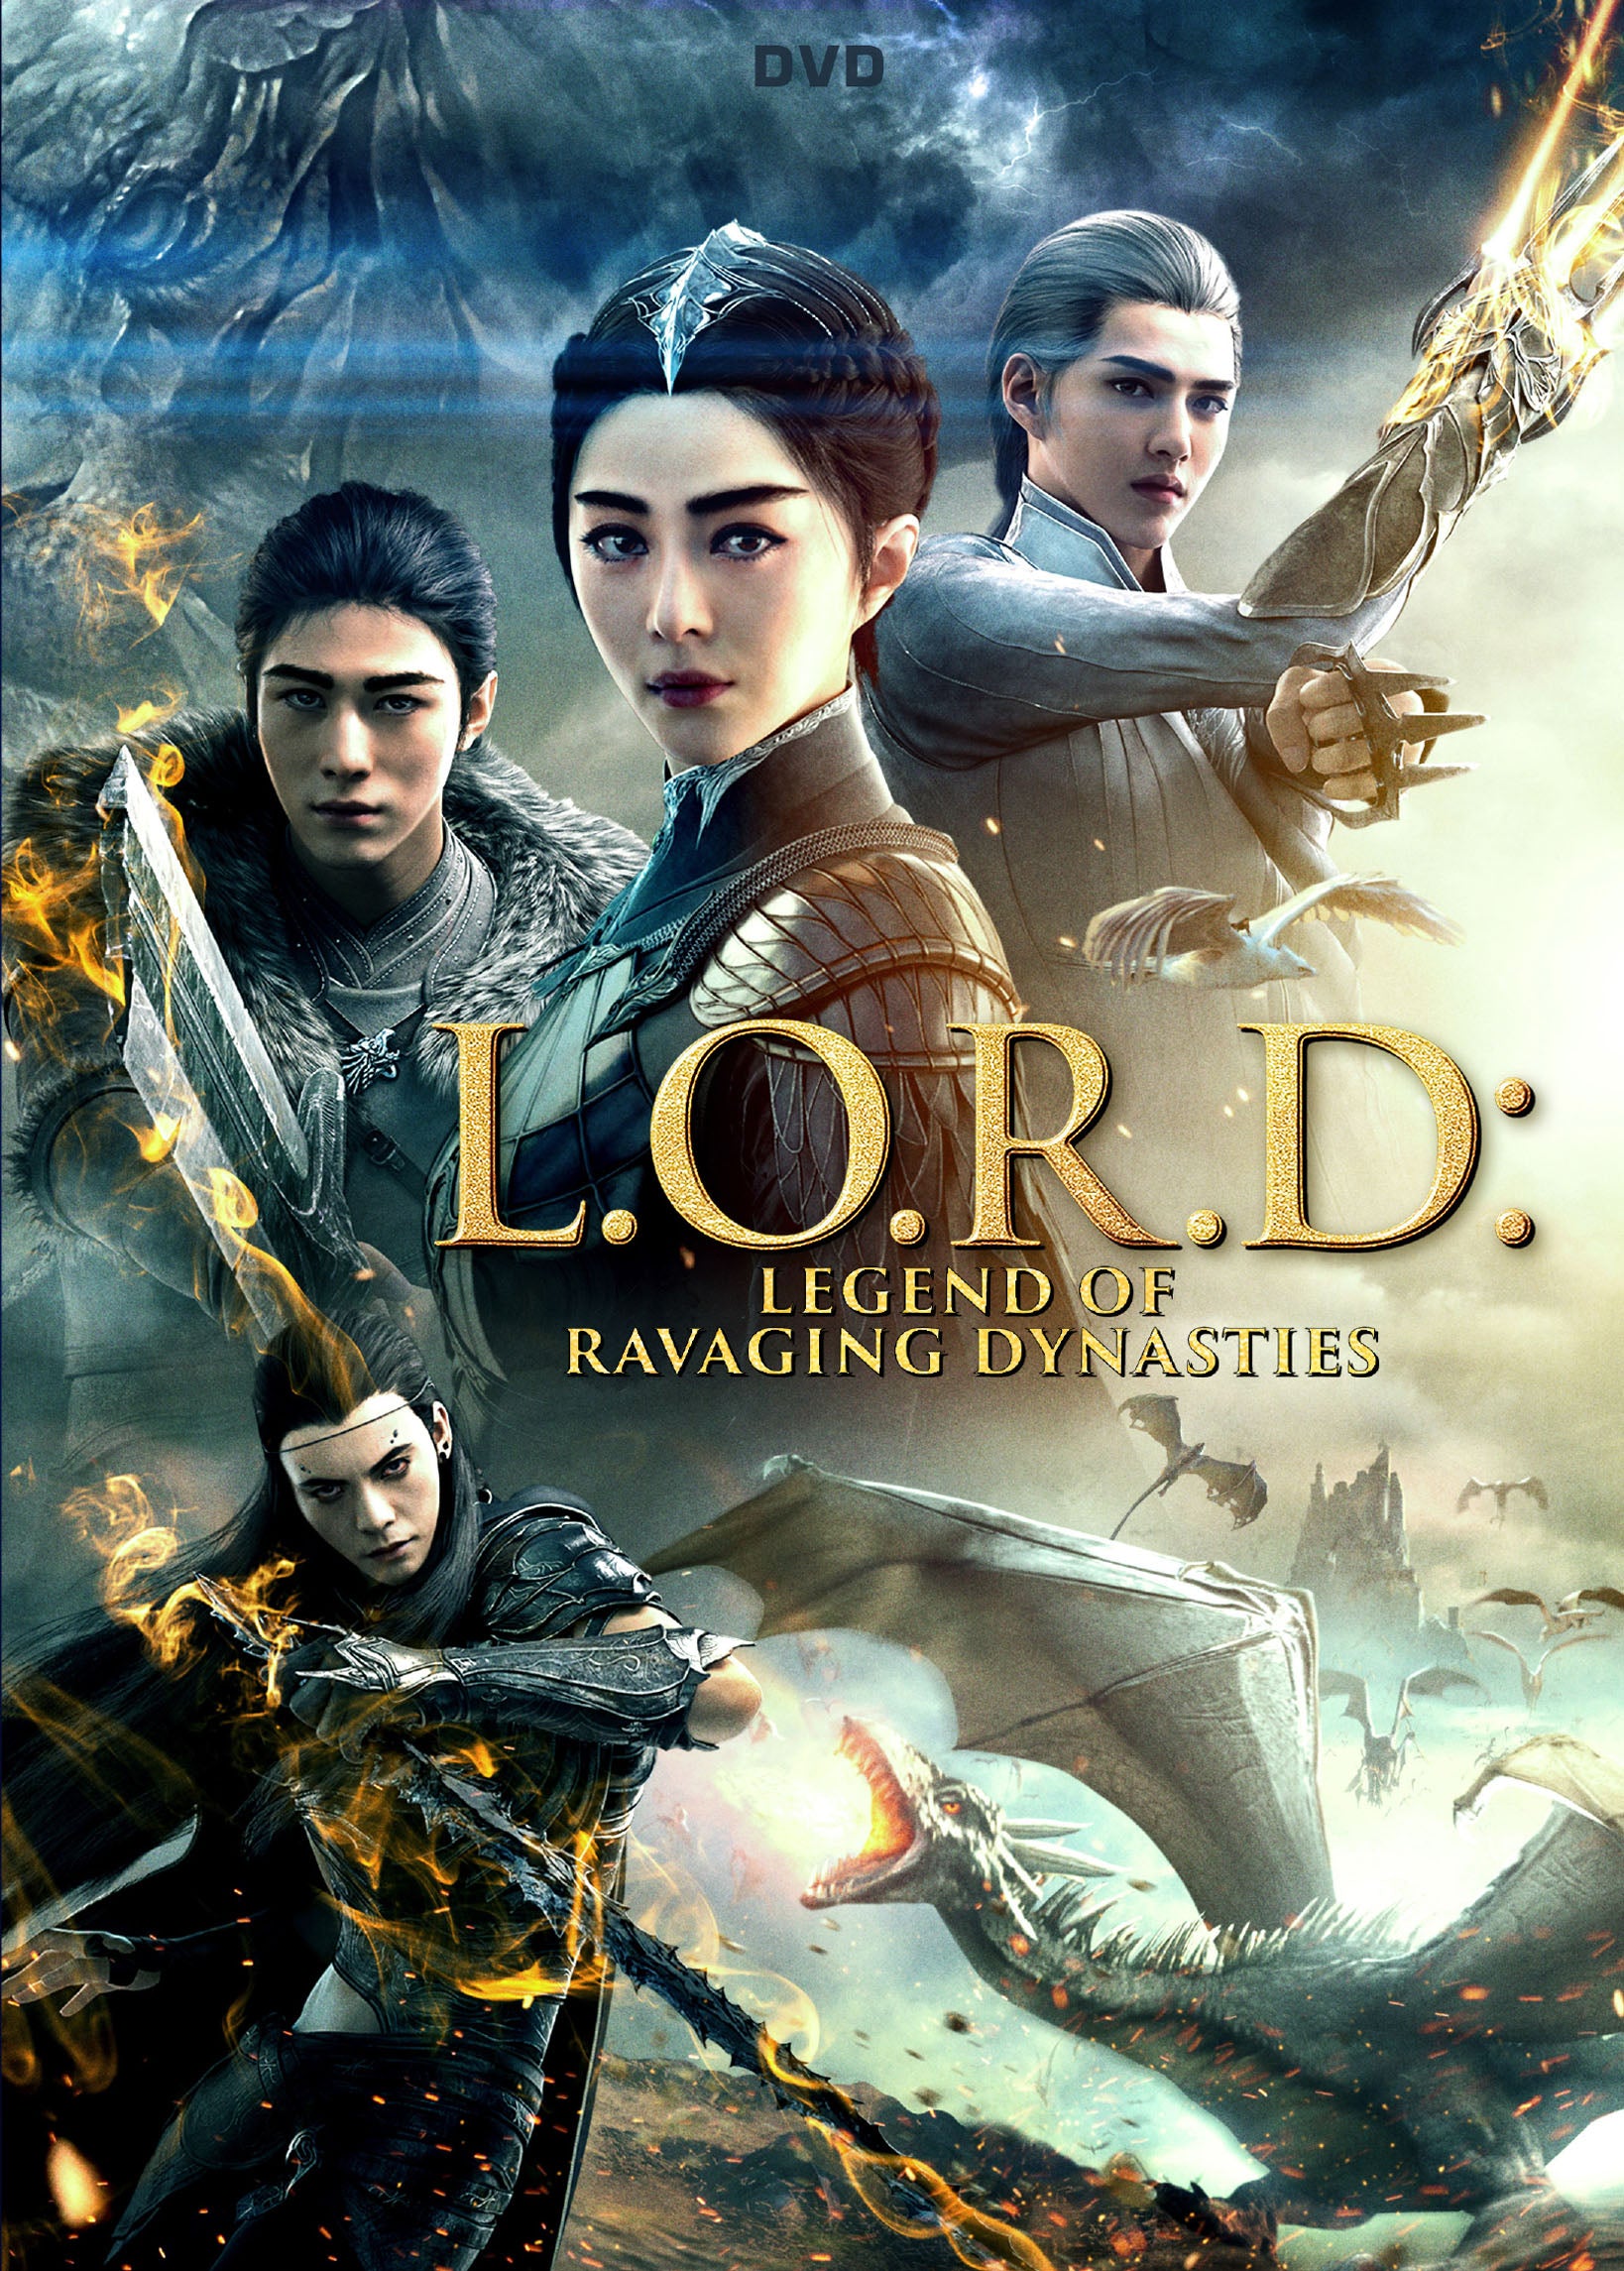 L.O.R.D.: Legend of Ravaging Dynasties cover art